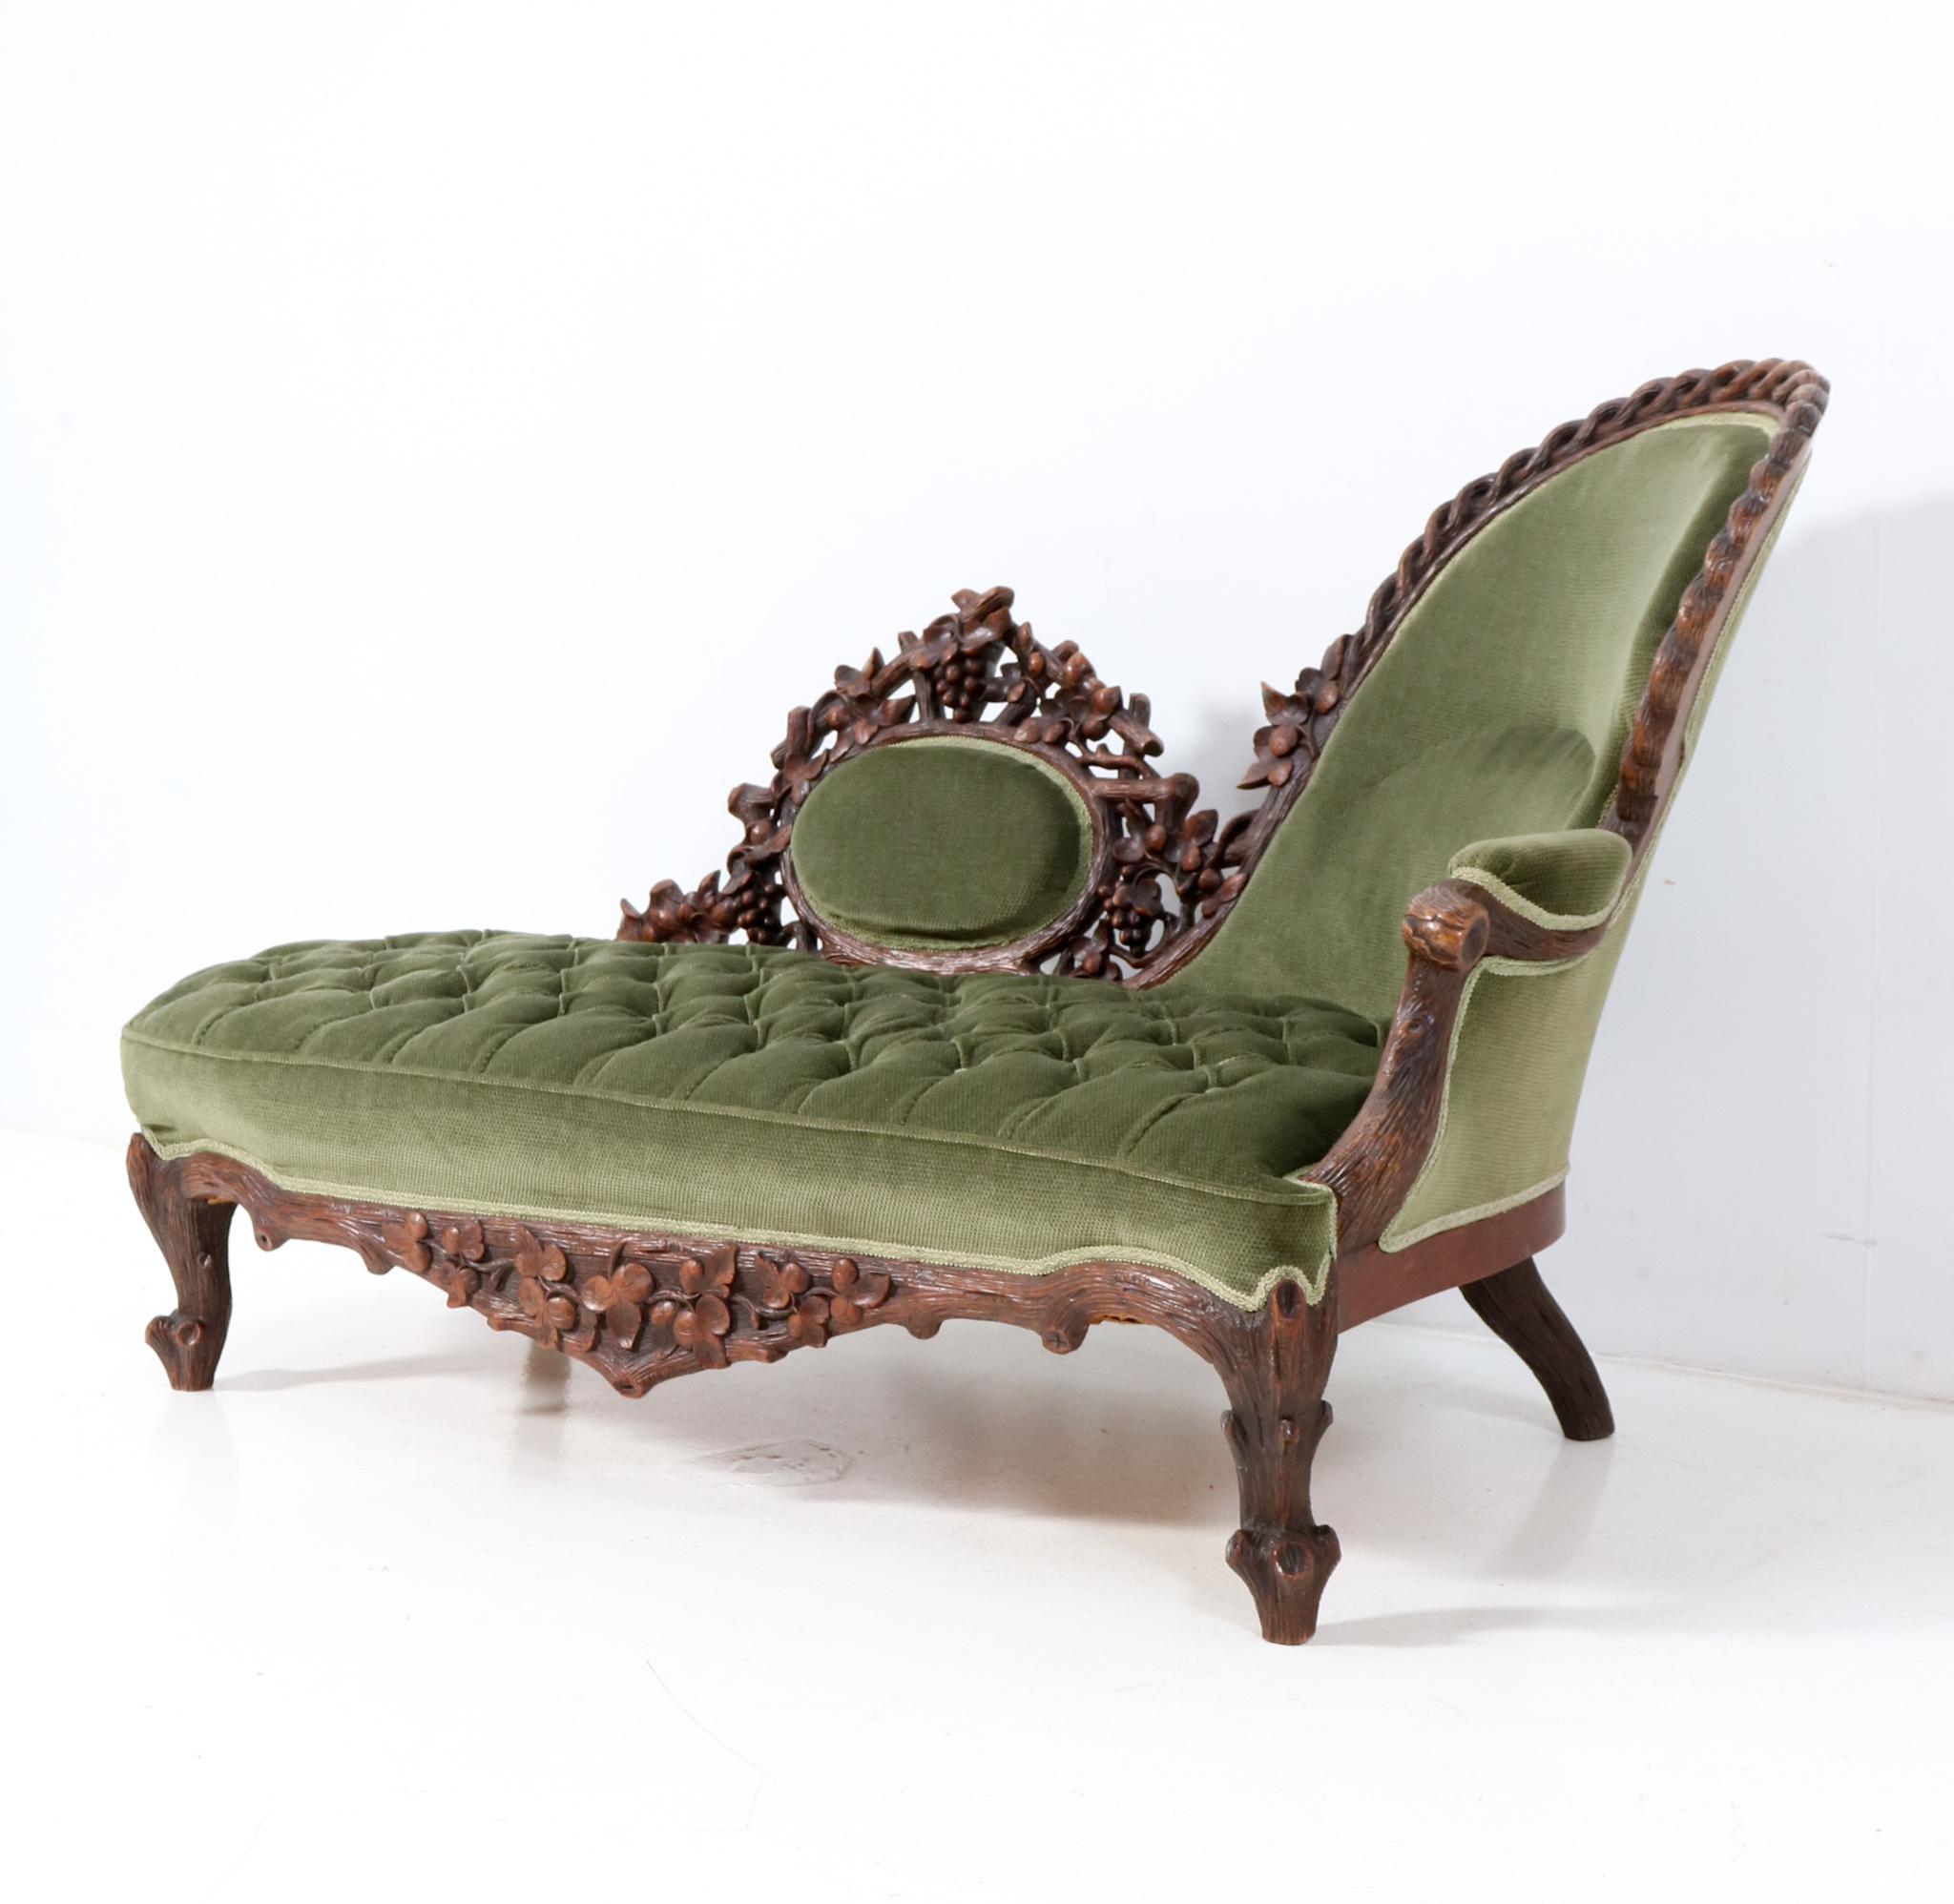 Walnut Black Forest Chaise Longue by Matthijs Horrix for Horrix Den Haag, 1890s In Good Condition For Sale In Amsterdam, NL